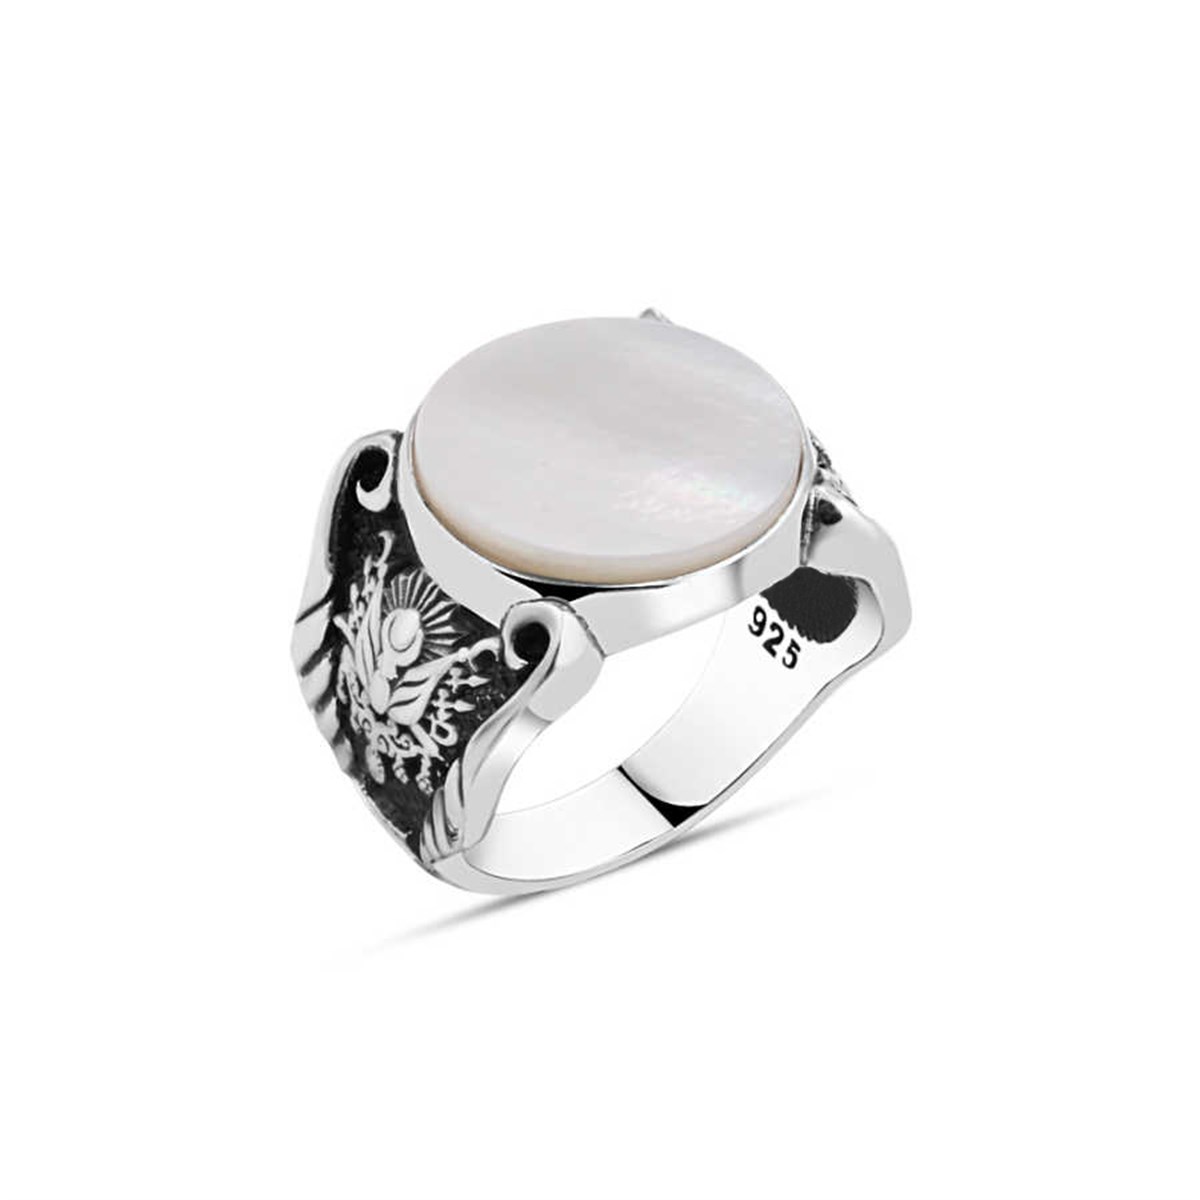 Plain Mother of Pearl Stone Sterling Silver Men's Ring